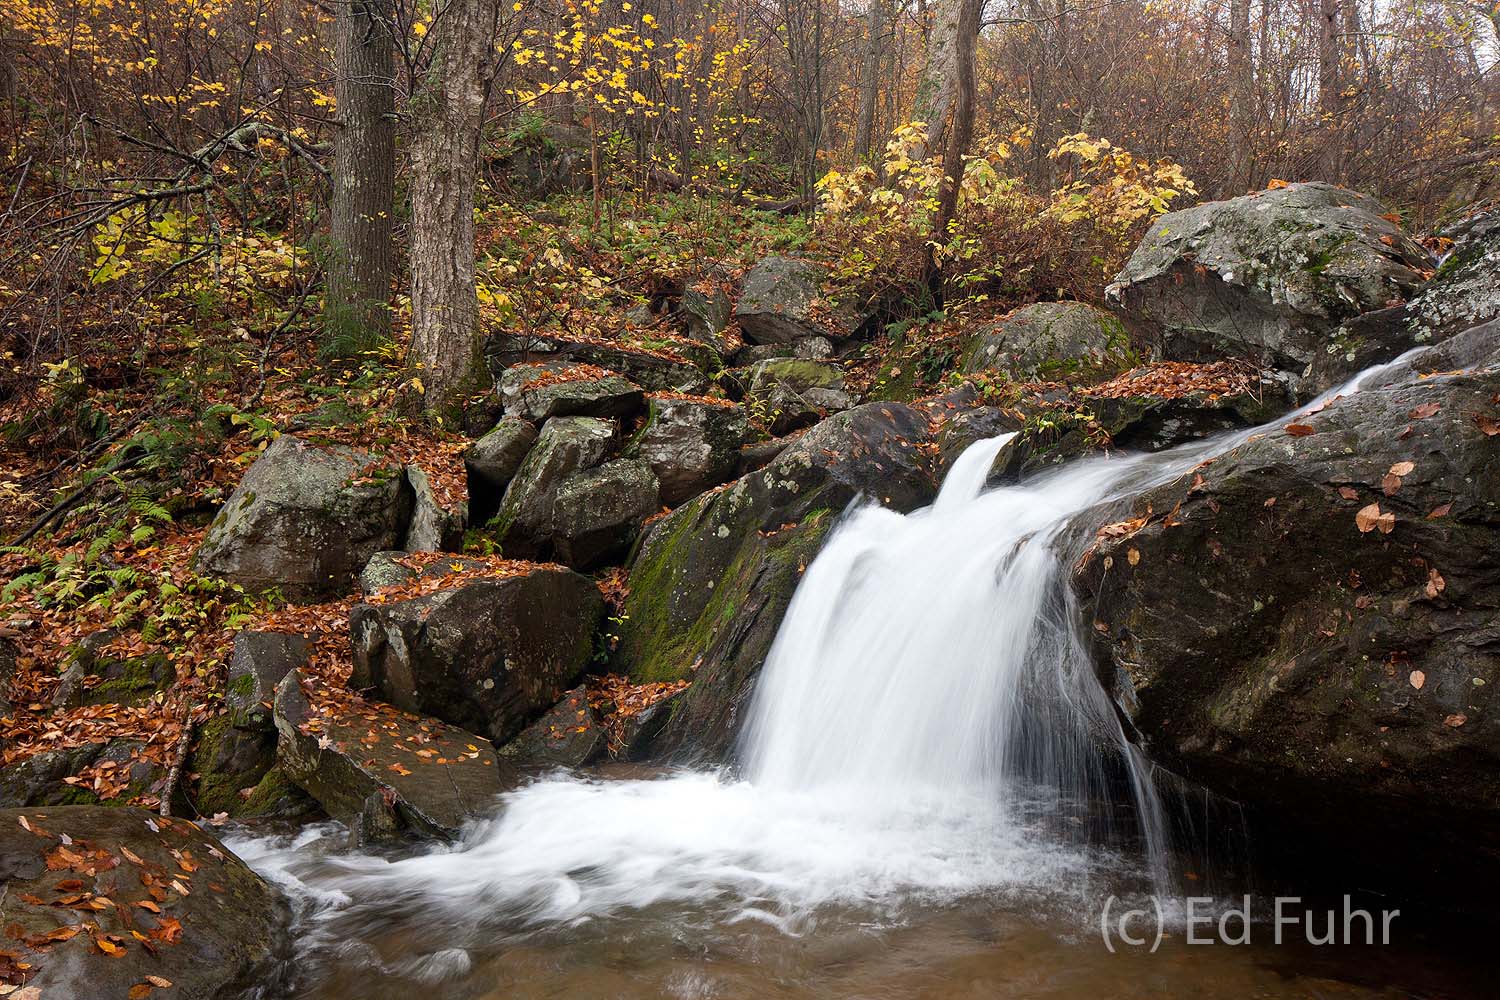 Hogcamp Branch of the Rose River offers a small but beautiful waterfall in the fading fall.